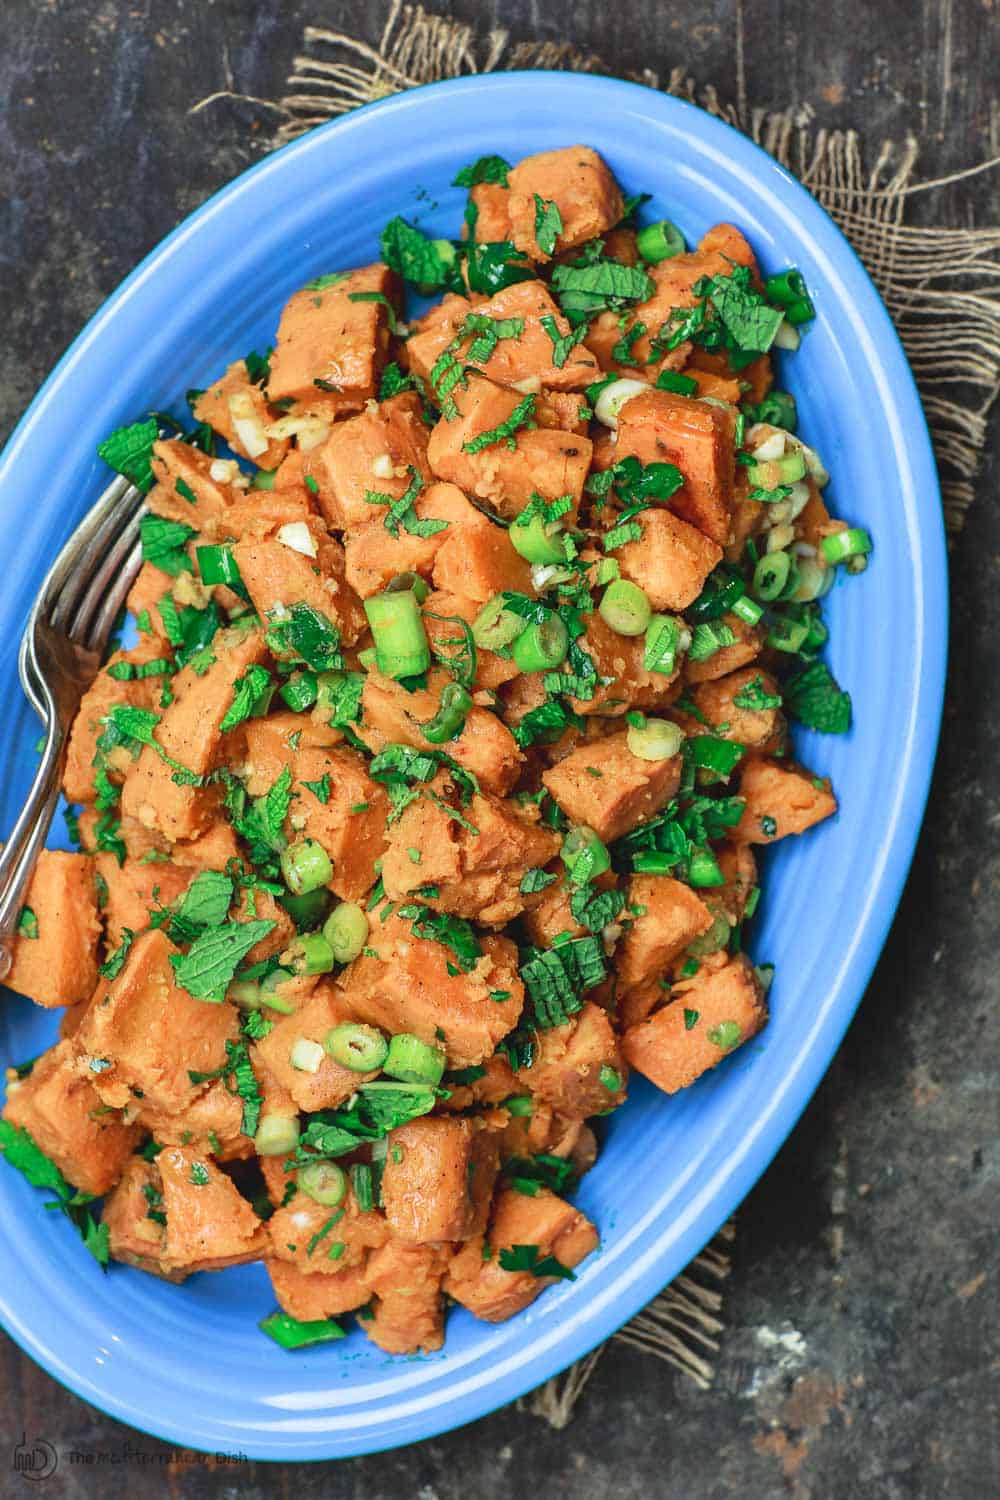 Simple sweet potato recipe served with fresh herbs, garlic, and scallions